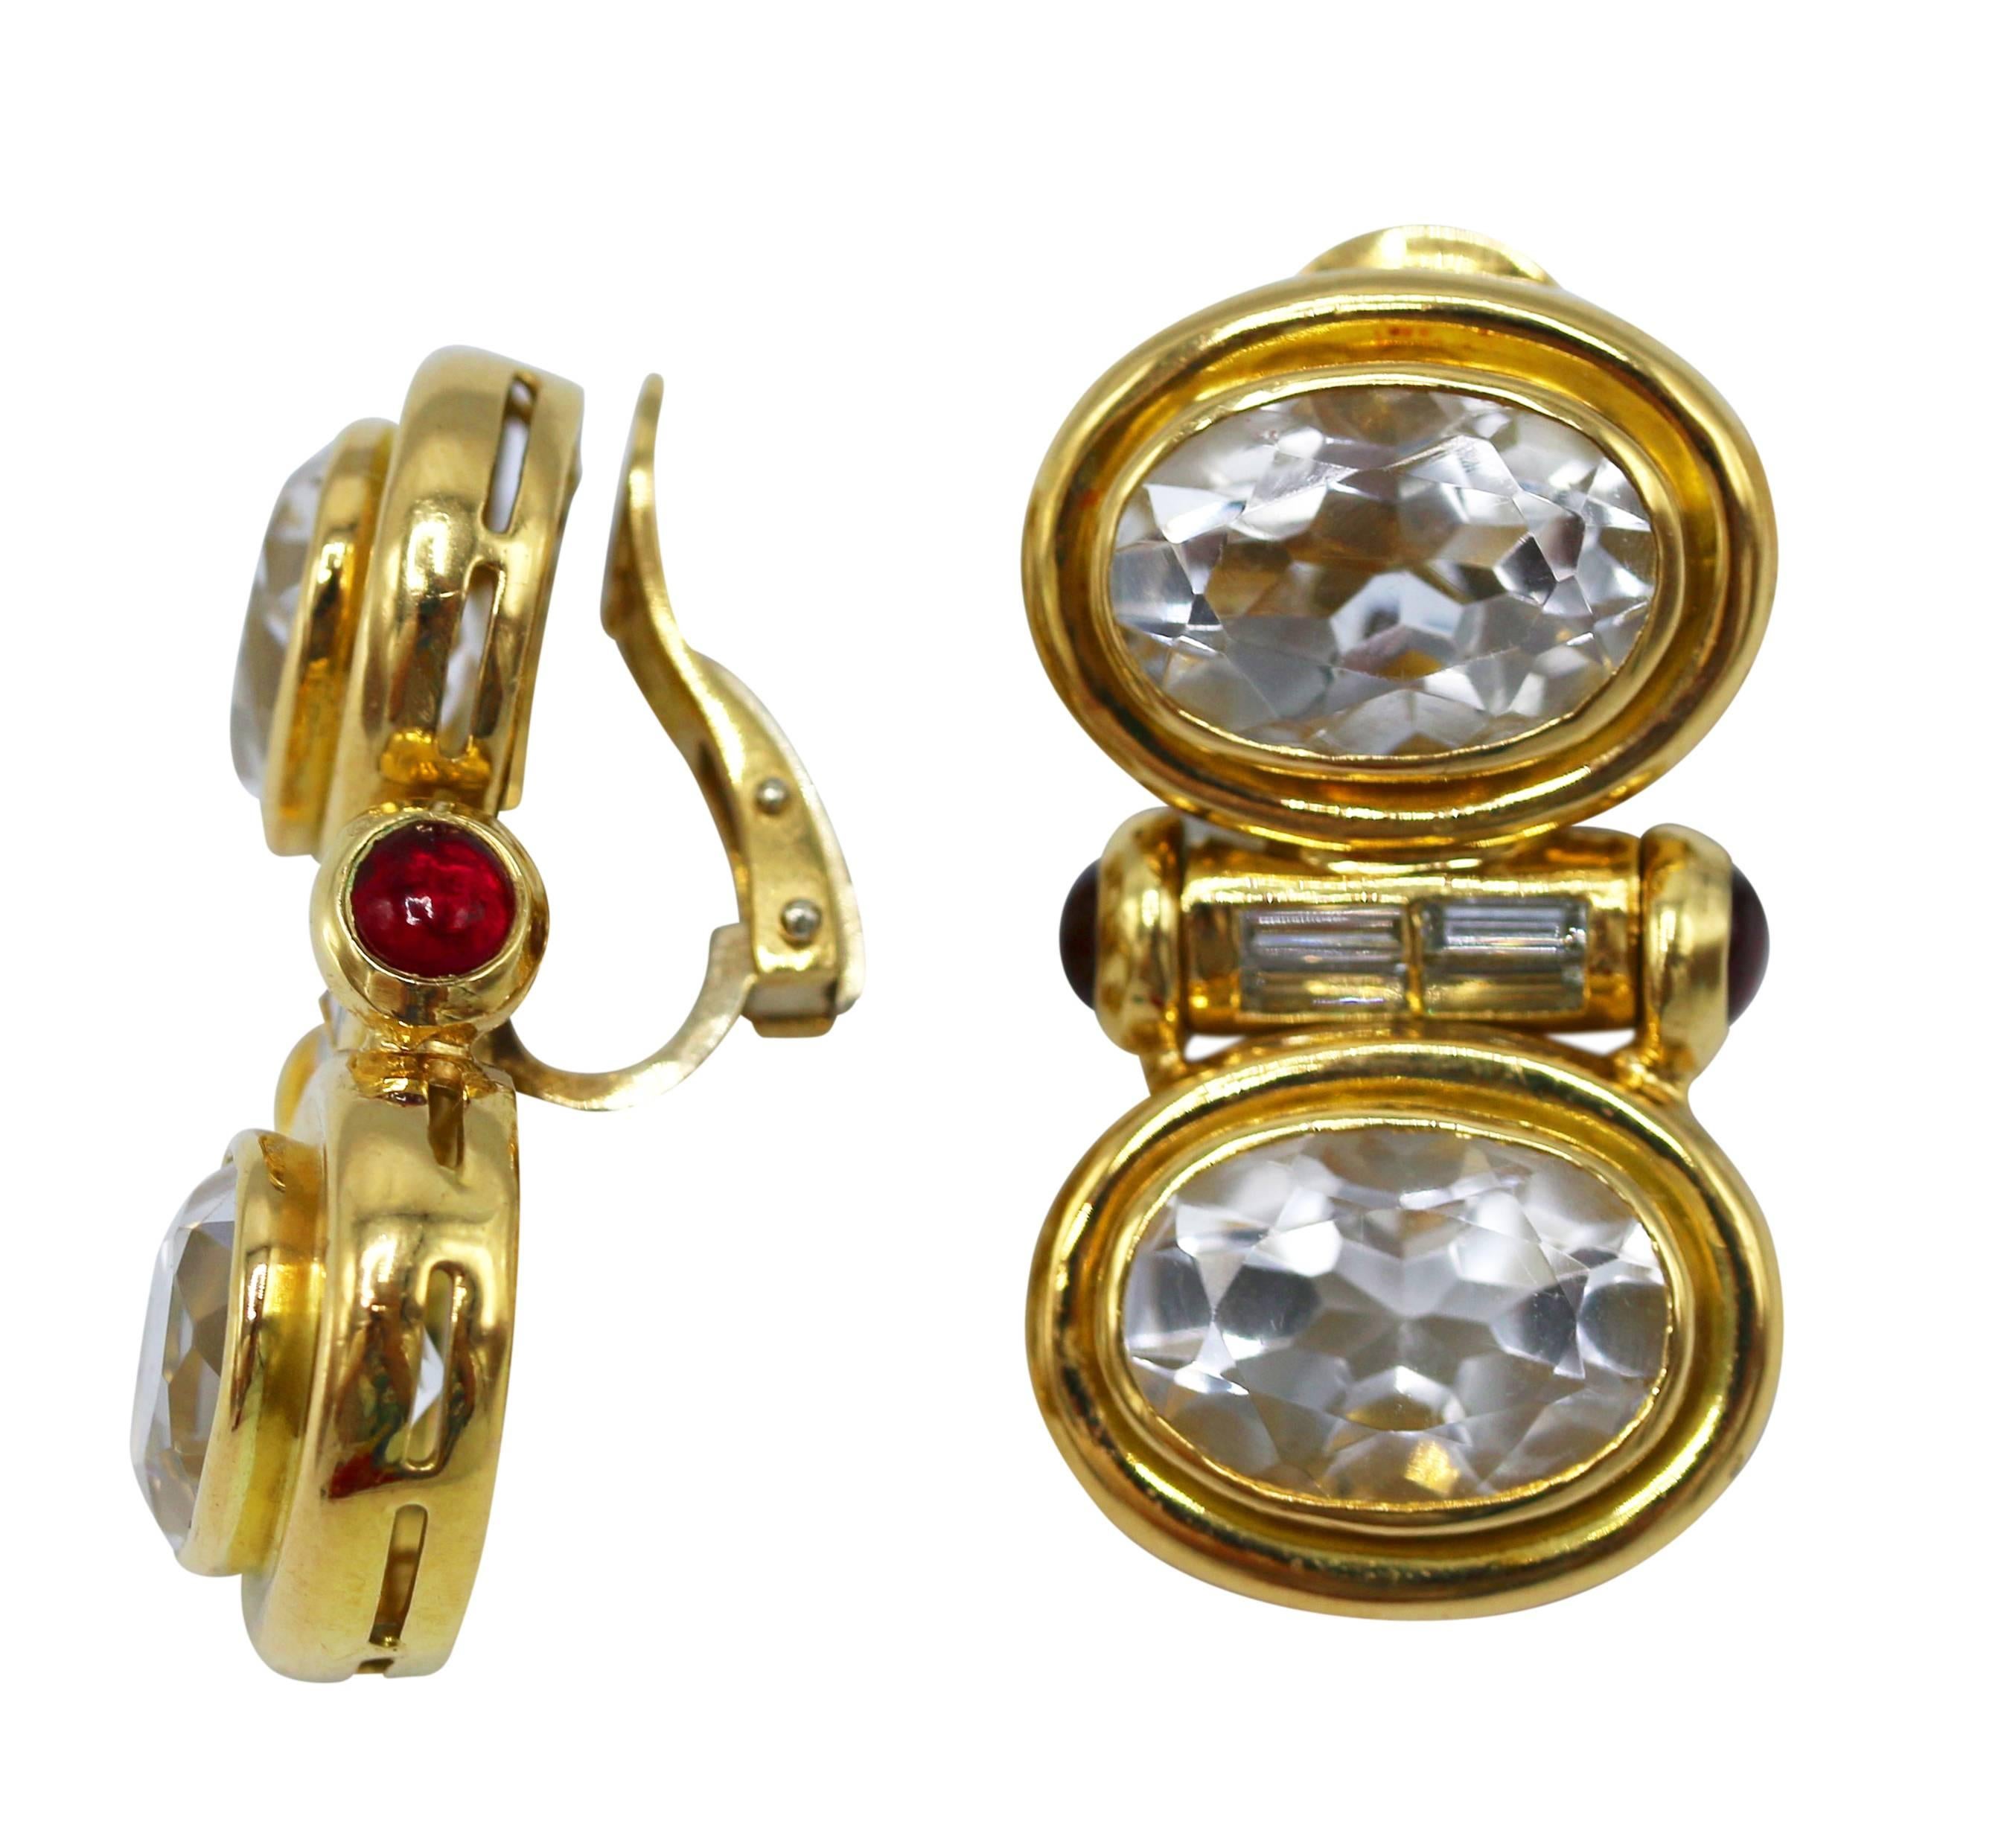 Pair of 18 karat gold, rock crystal, diamond and ruby earclips, large pendants collet-set with 4 faceted oval rock crystals, the center accented by baguette diamonds and cabochon rubies, gross weight 32.5 grams, measuring 1 3/8 by 3/4 inches. Well